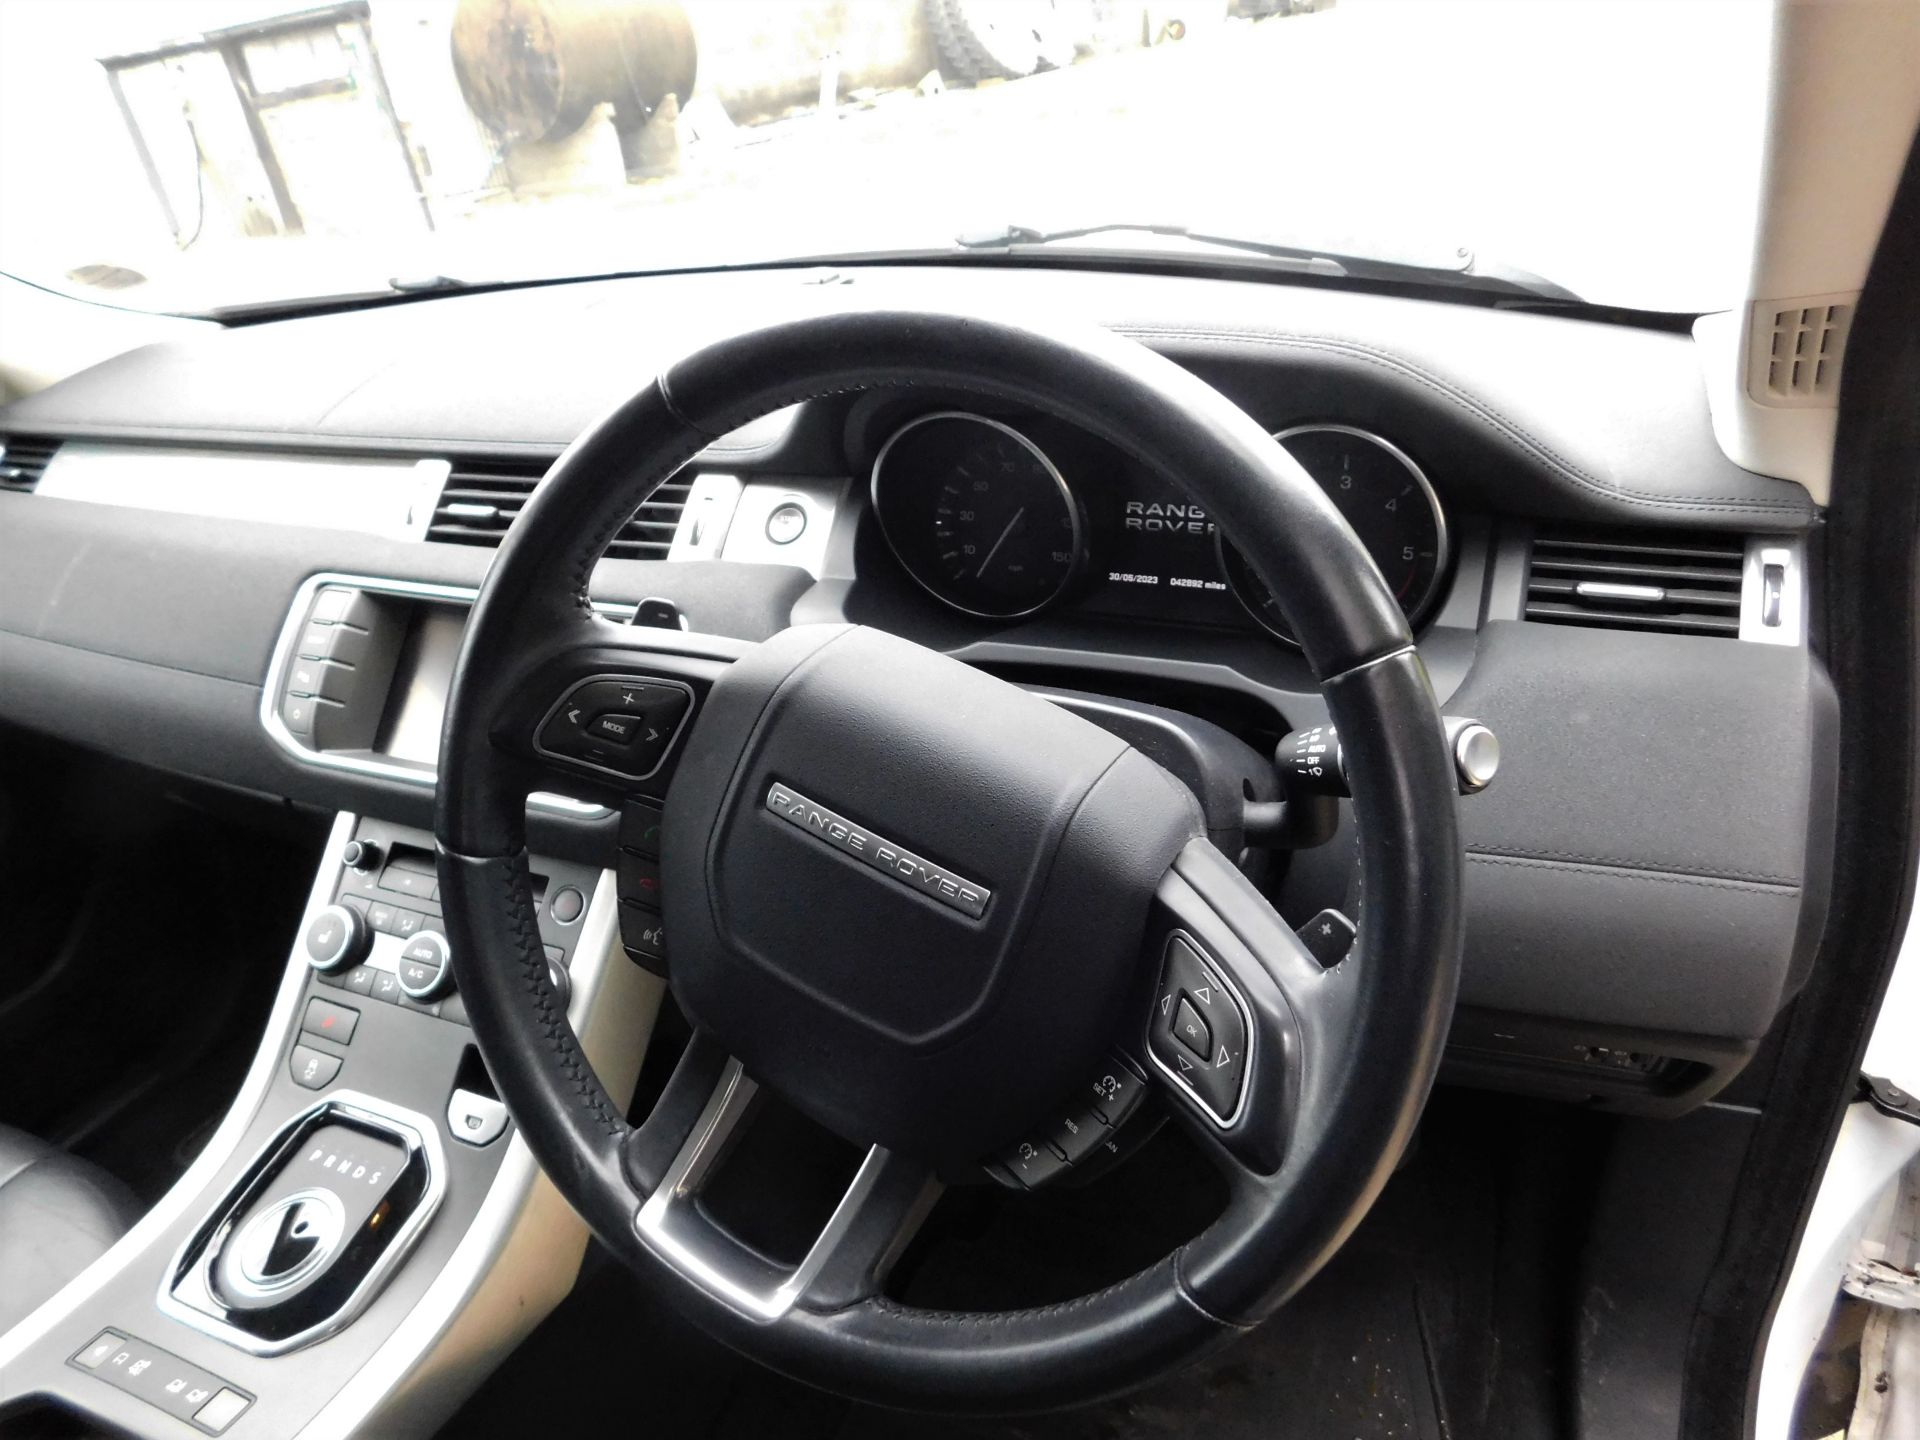 Land Rover Range Rover Evoque, Hatchback, 2.2 Sd4 Pure 5dr Auto [Tech Pack], Registration LL62 - Image 22 of 26